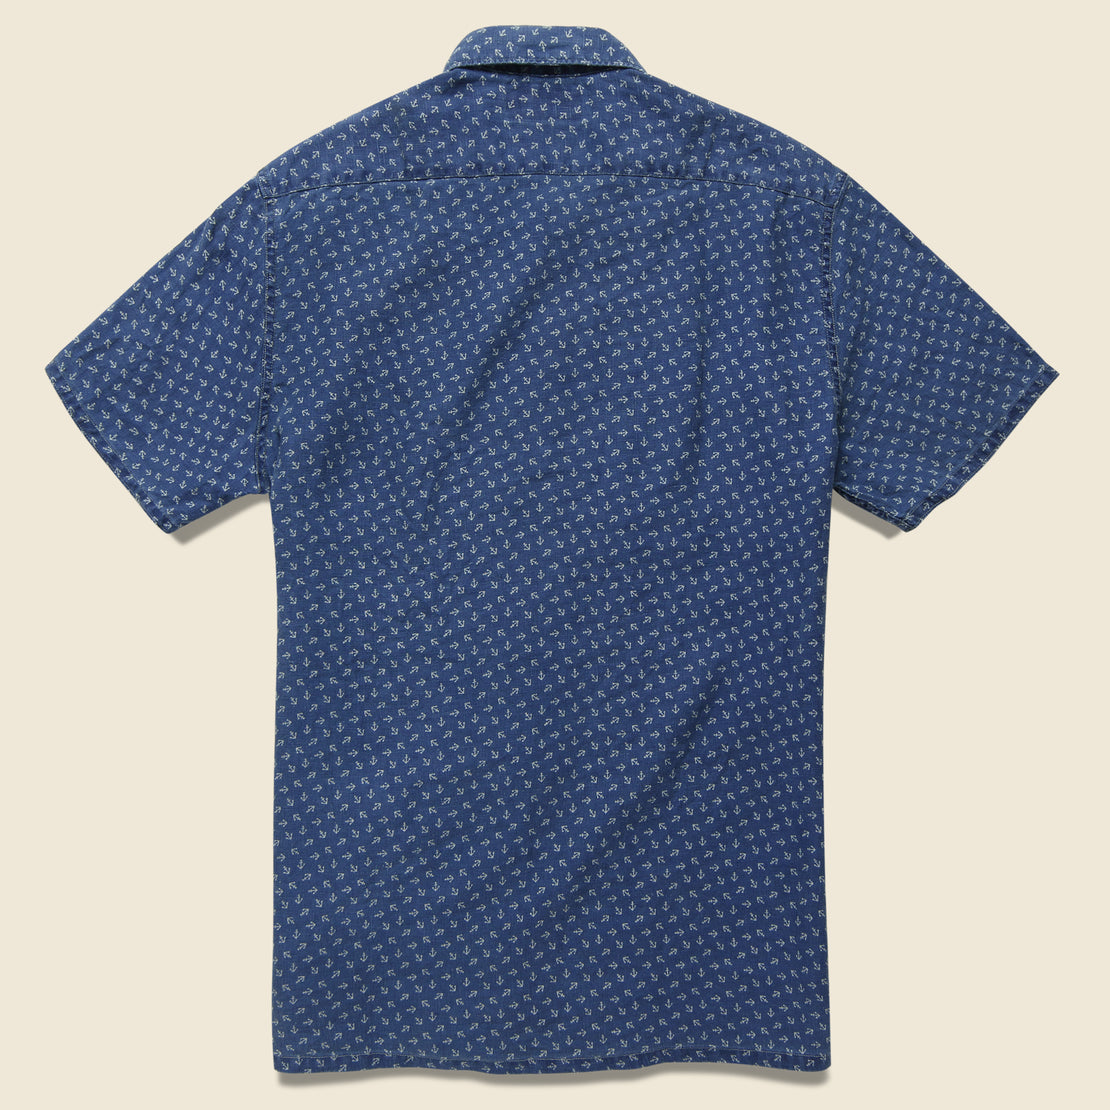 Anchor-Print Linen Camp Shirt - Blue/Cream - RRL - STAG Provisions - Tops - S/S Woven - Other Pattern